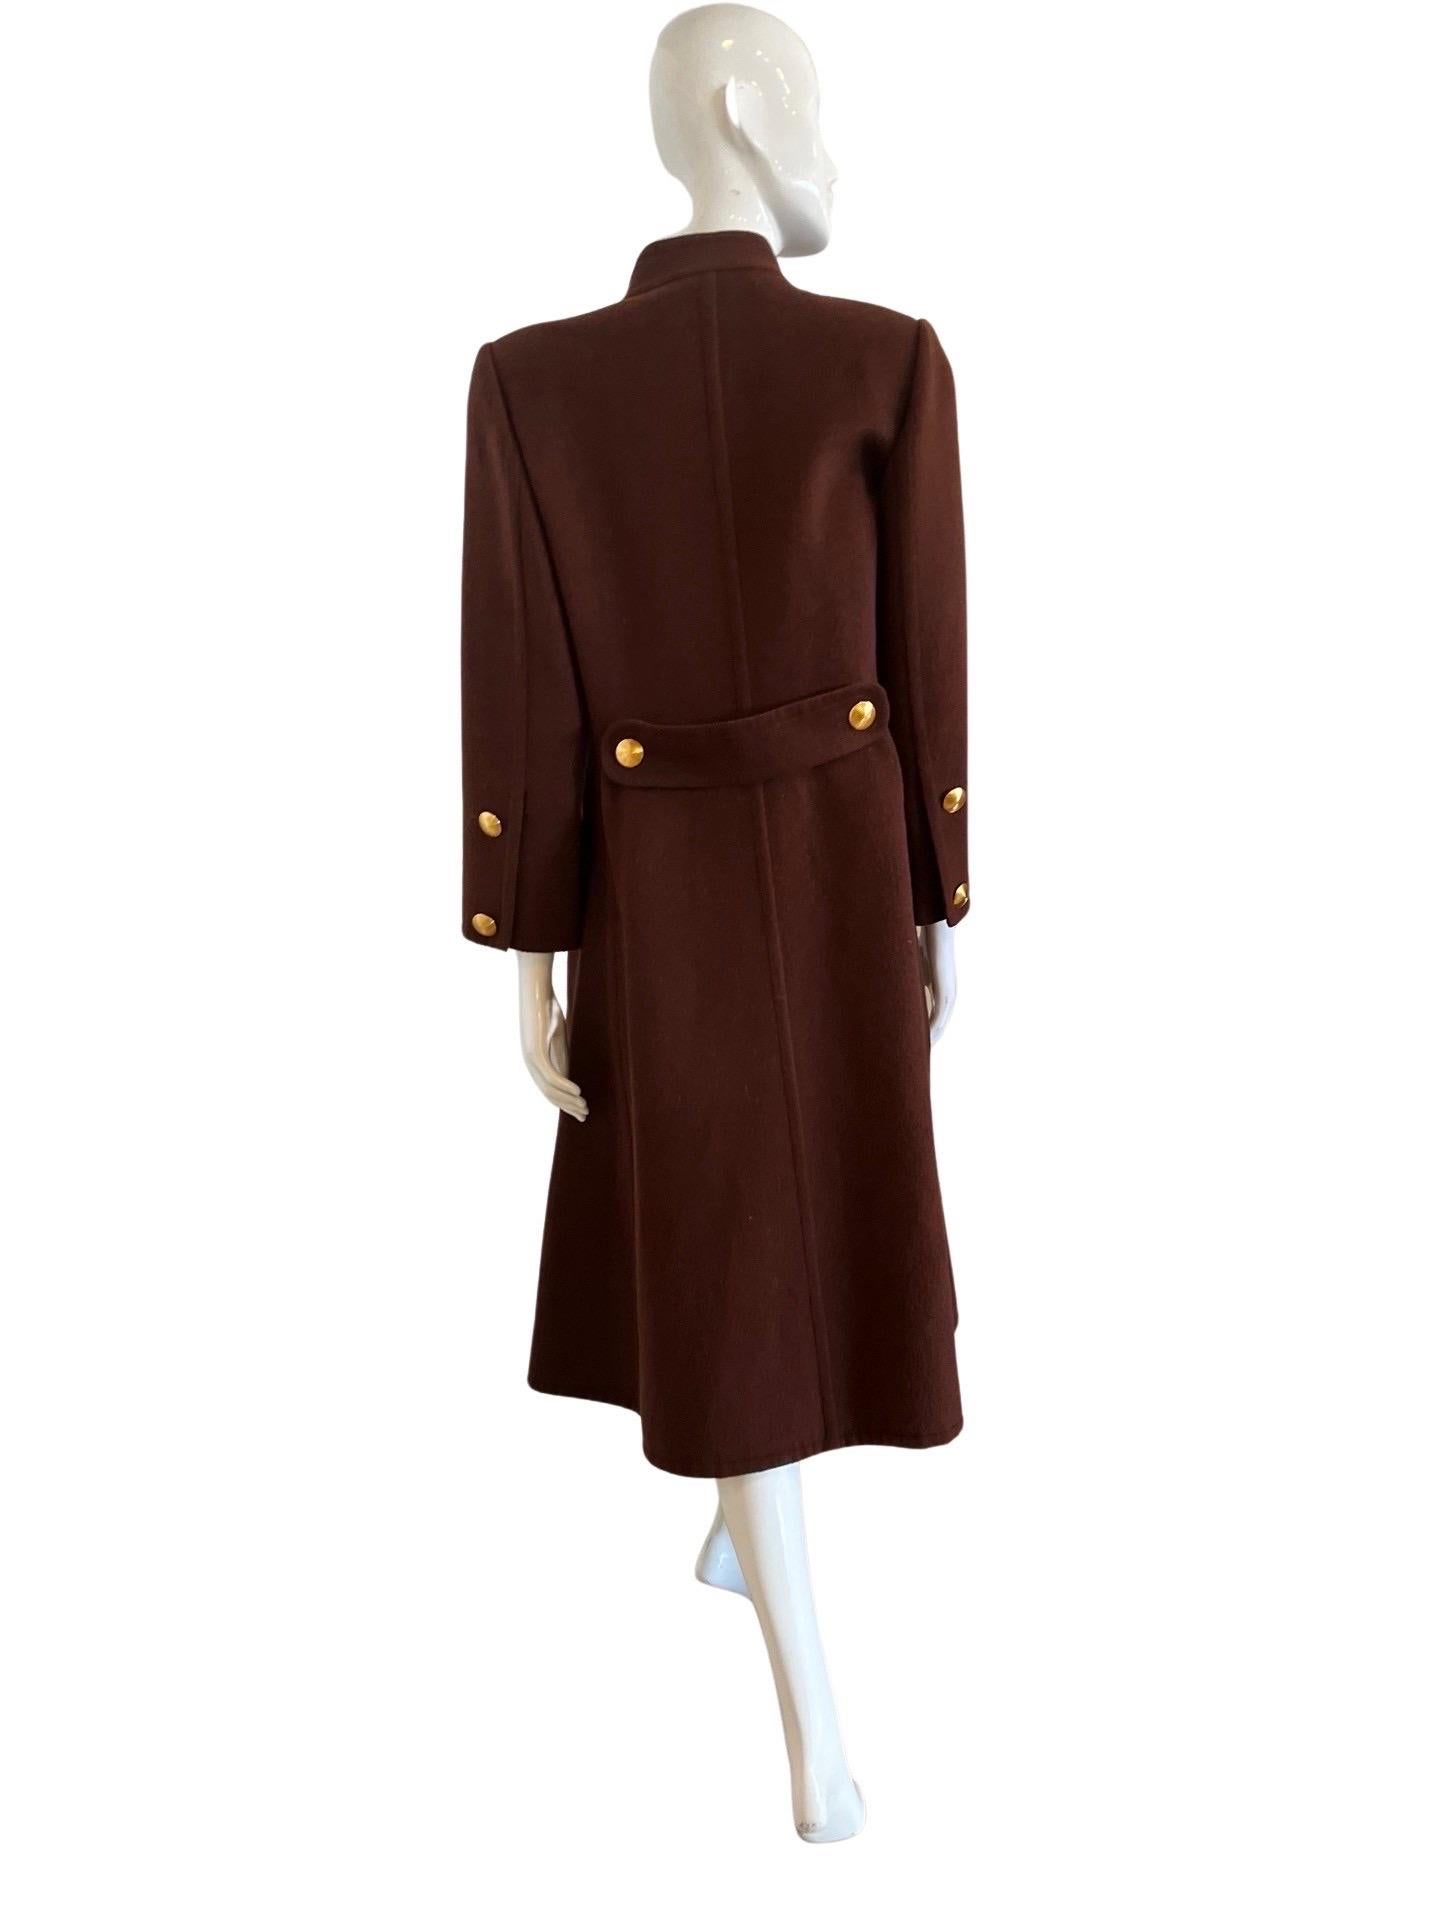 Givenchy Couture from the 1980s, the composition label is not clear, but it would feel to be cashmere or a cashmere wool mix. This coat is incredible and the colors are very unique. A warm chocolate brown on the outside and peach colored inside,